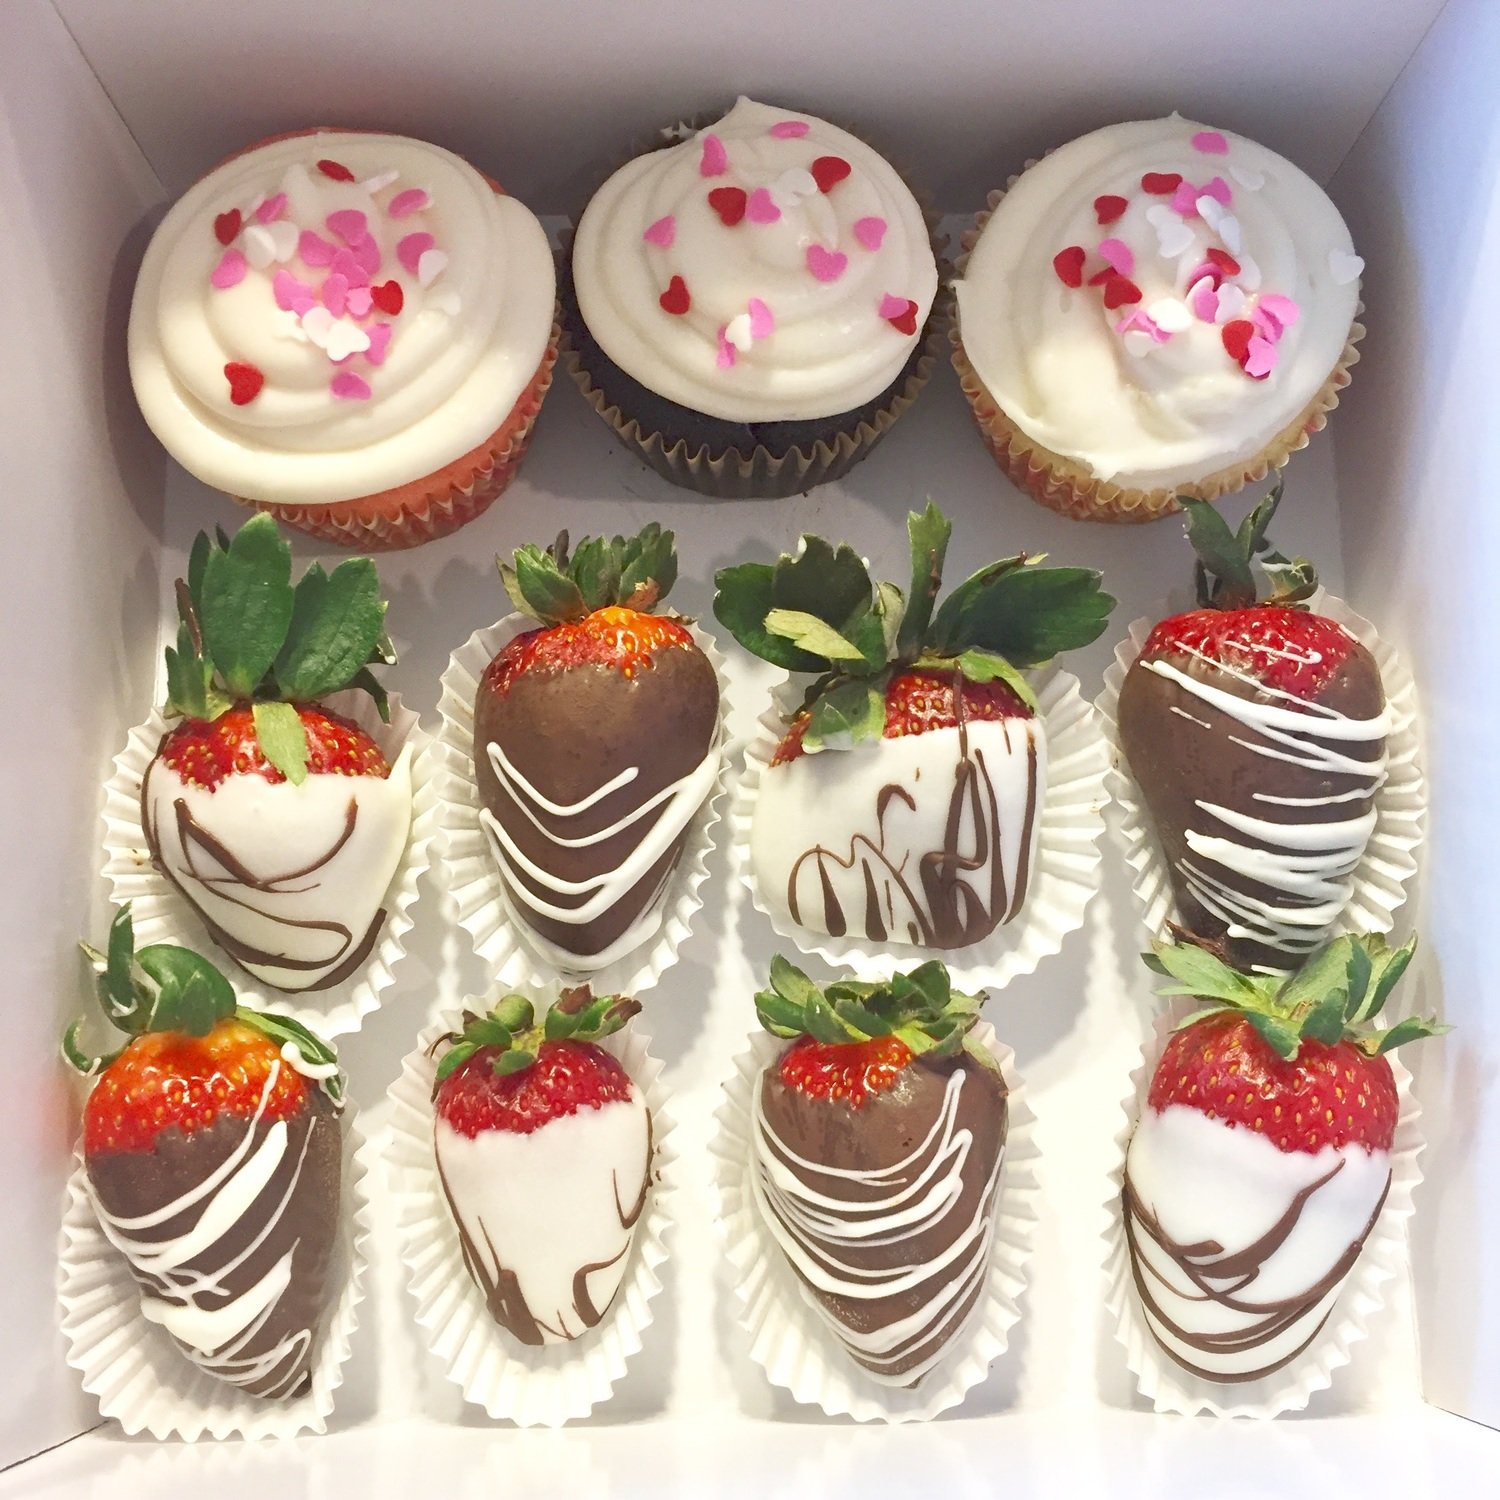 8 Gourmet Chocolate Covered Strawberries 3 Strawberry Mousse